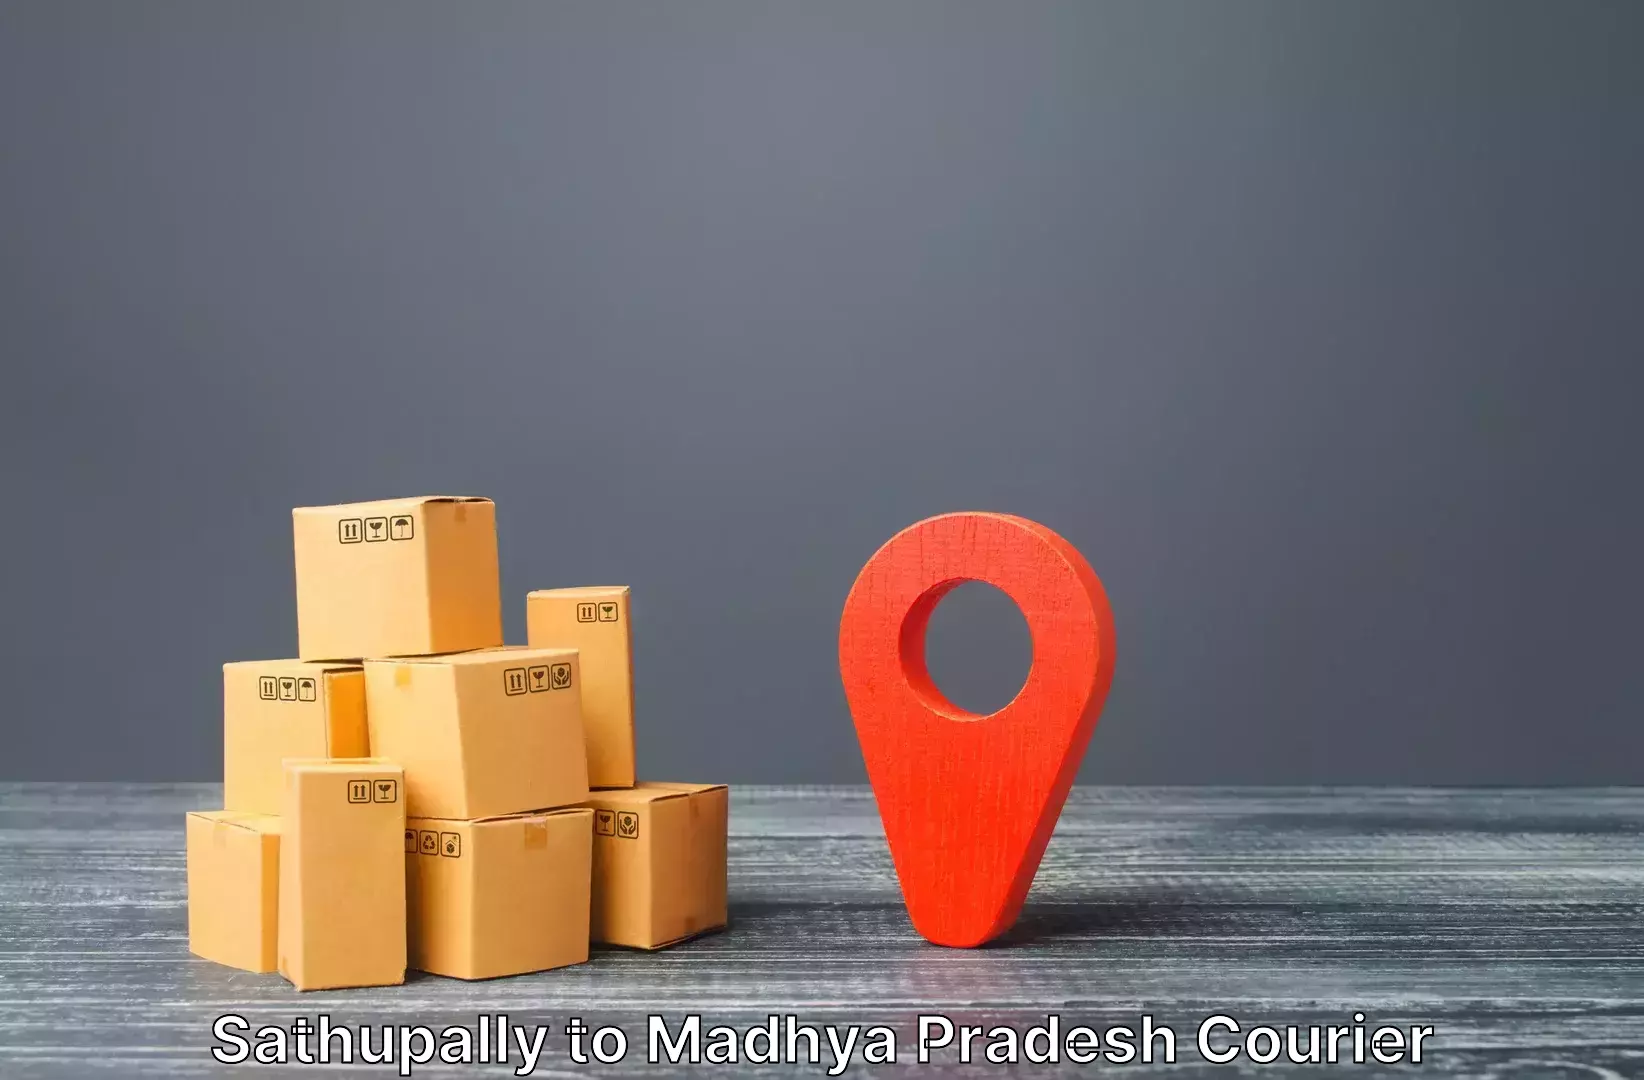 Luggage delivery network Sathupally to Madwas